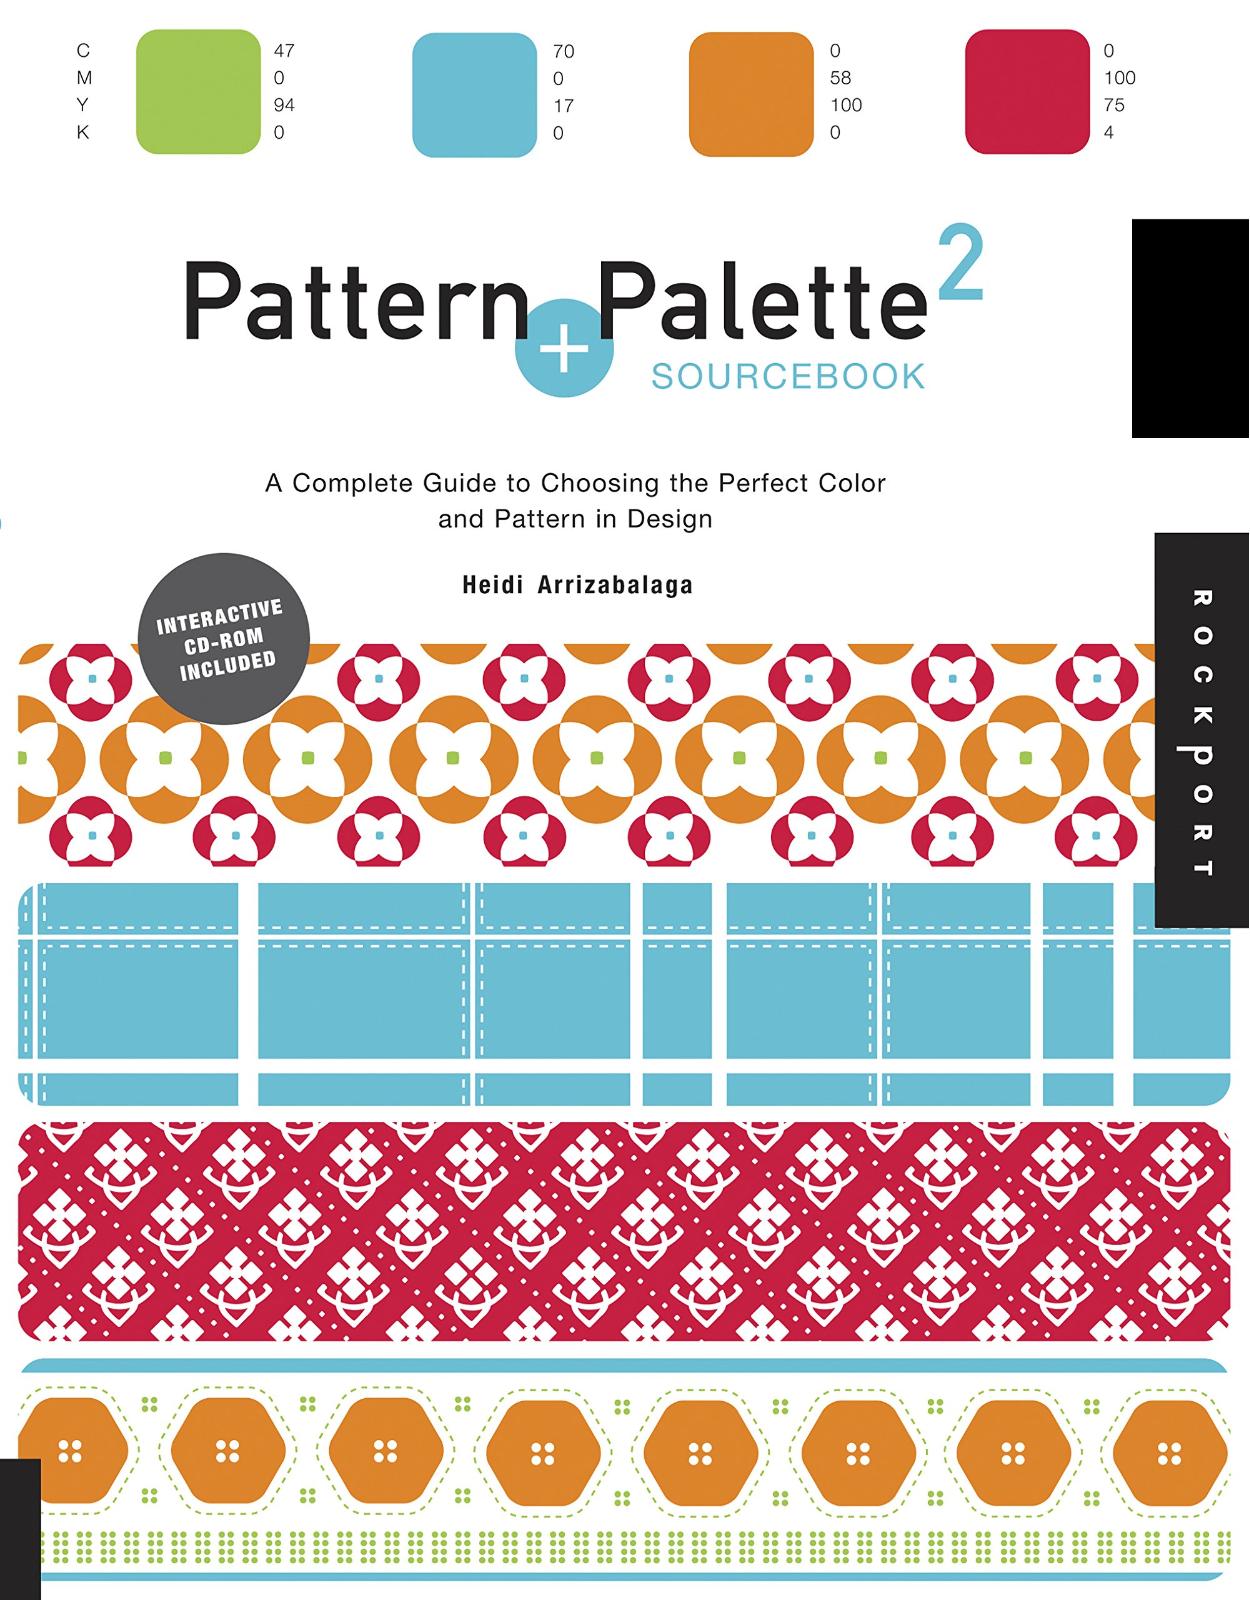 Pattern and Palette 2 Sourcebook